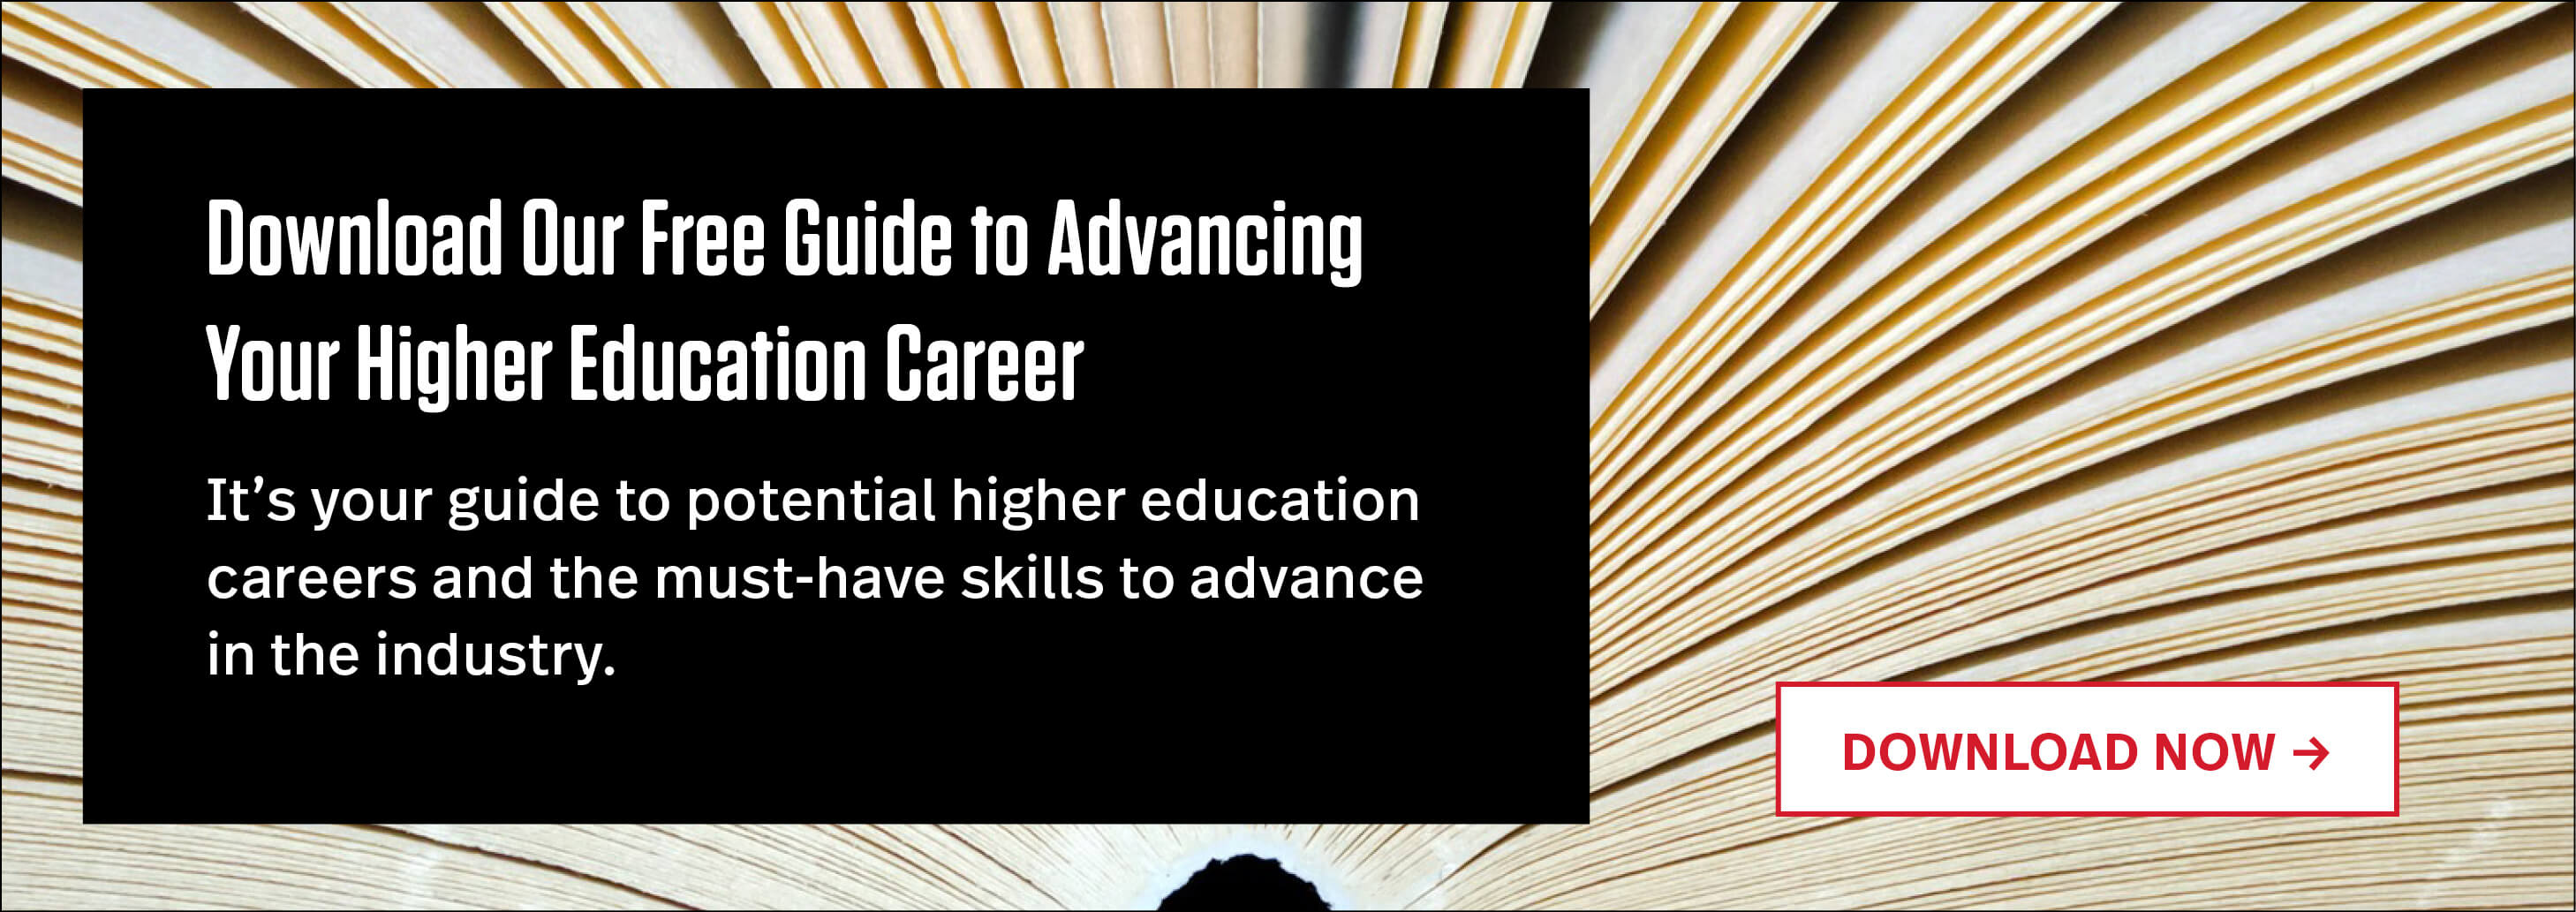 Download Our Free Guide to Advancing in Higher Education“ width=